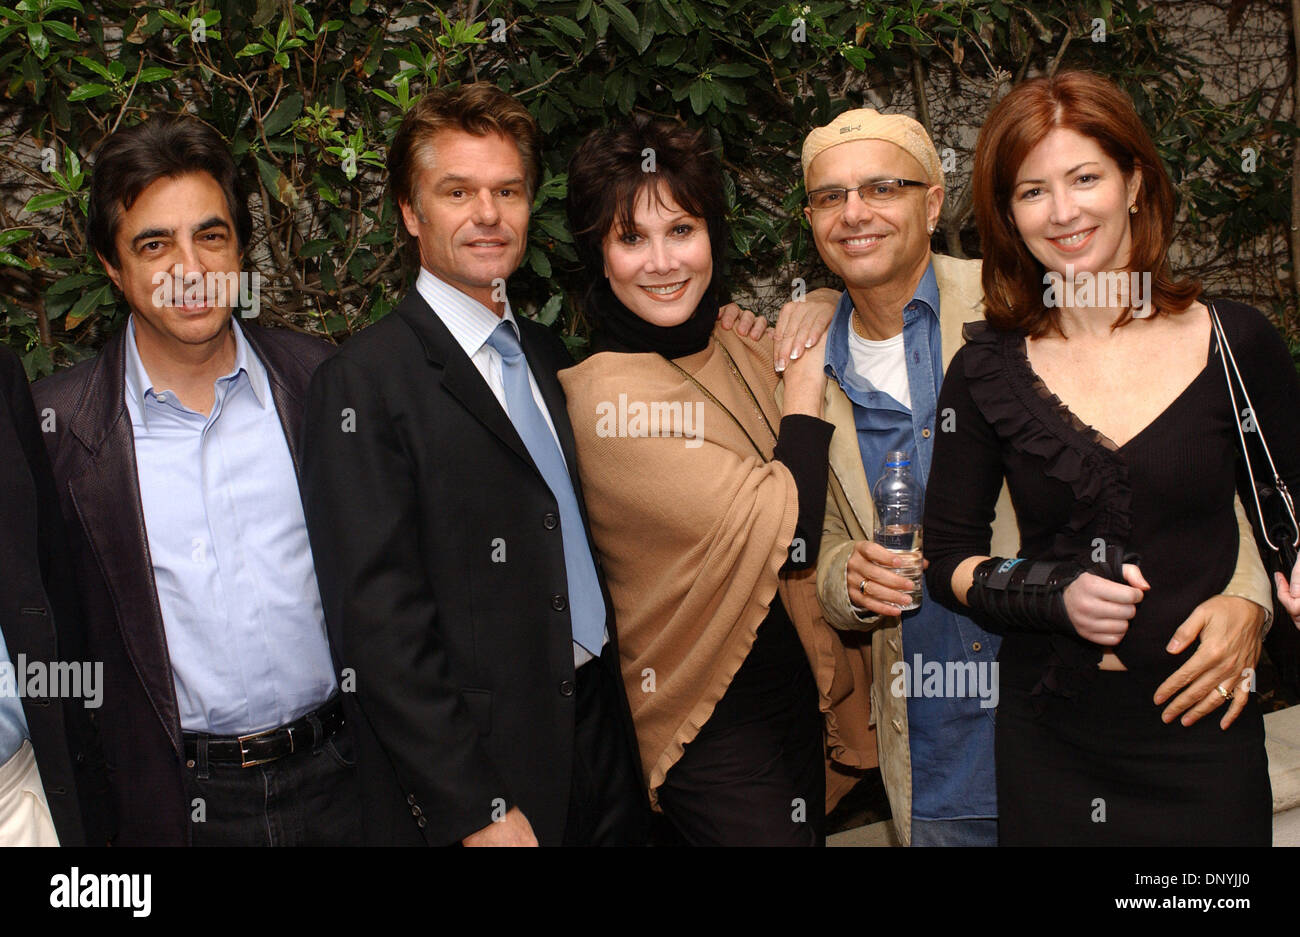 Jan 31, 2006; Beverly Hills, CA, USA; Actors JOE MATEGNA, HARRY HAMLIN, MICHELLE LEE, JOE PANTOLIANO and DANA DELANY at the Atlantic Monthly and Creative Coalition 'State Of The Union Address Cocktail and Viewing Dinner' in Beverly Hills. Mandatory Credit: Photo by Rich Schmitt/ZUMA Press. (©) Copyright 2006 by Rich Schmitt Stock Photo